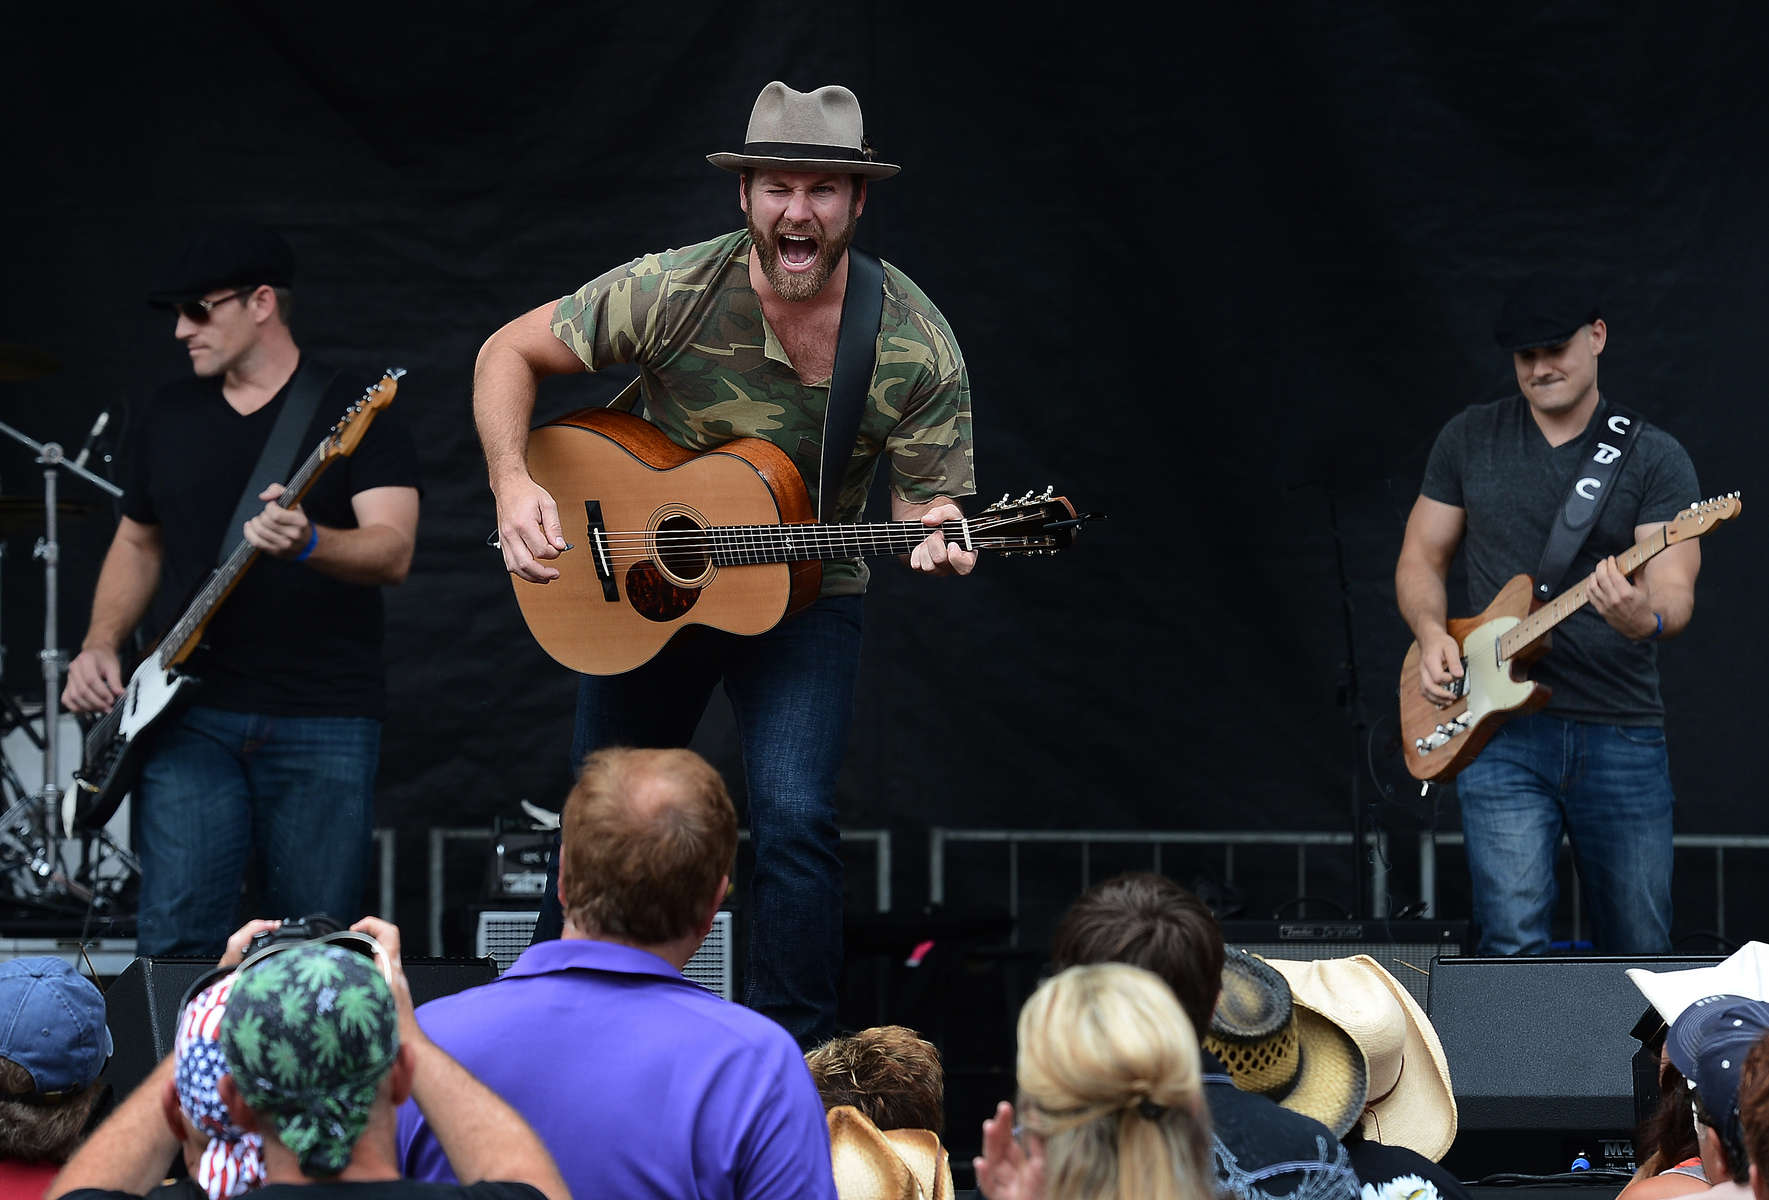 Drake White performs for the crowd at the Bud Light Stage at Bridgestone Arena during the 2013 Country Music Festival in Nashville, Tenn. (The Tennessean/ Mark Zaleski)